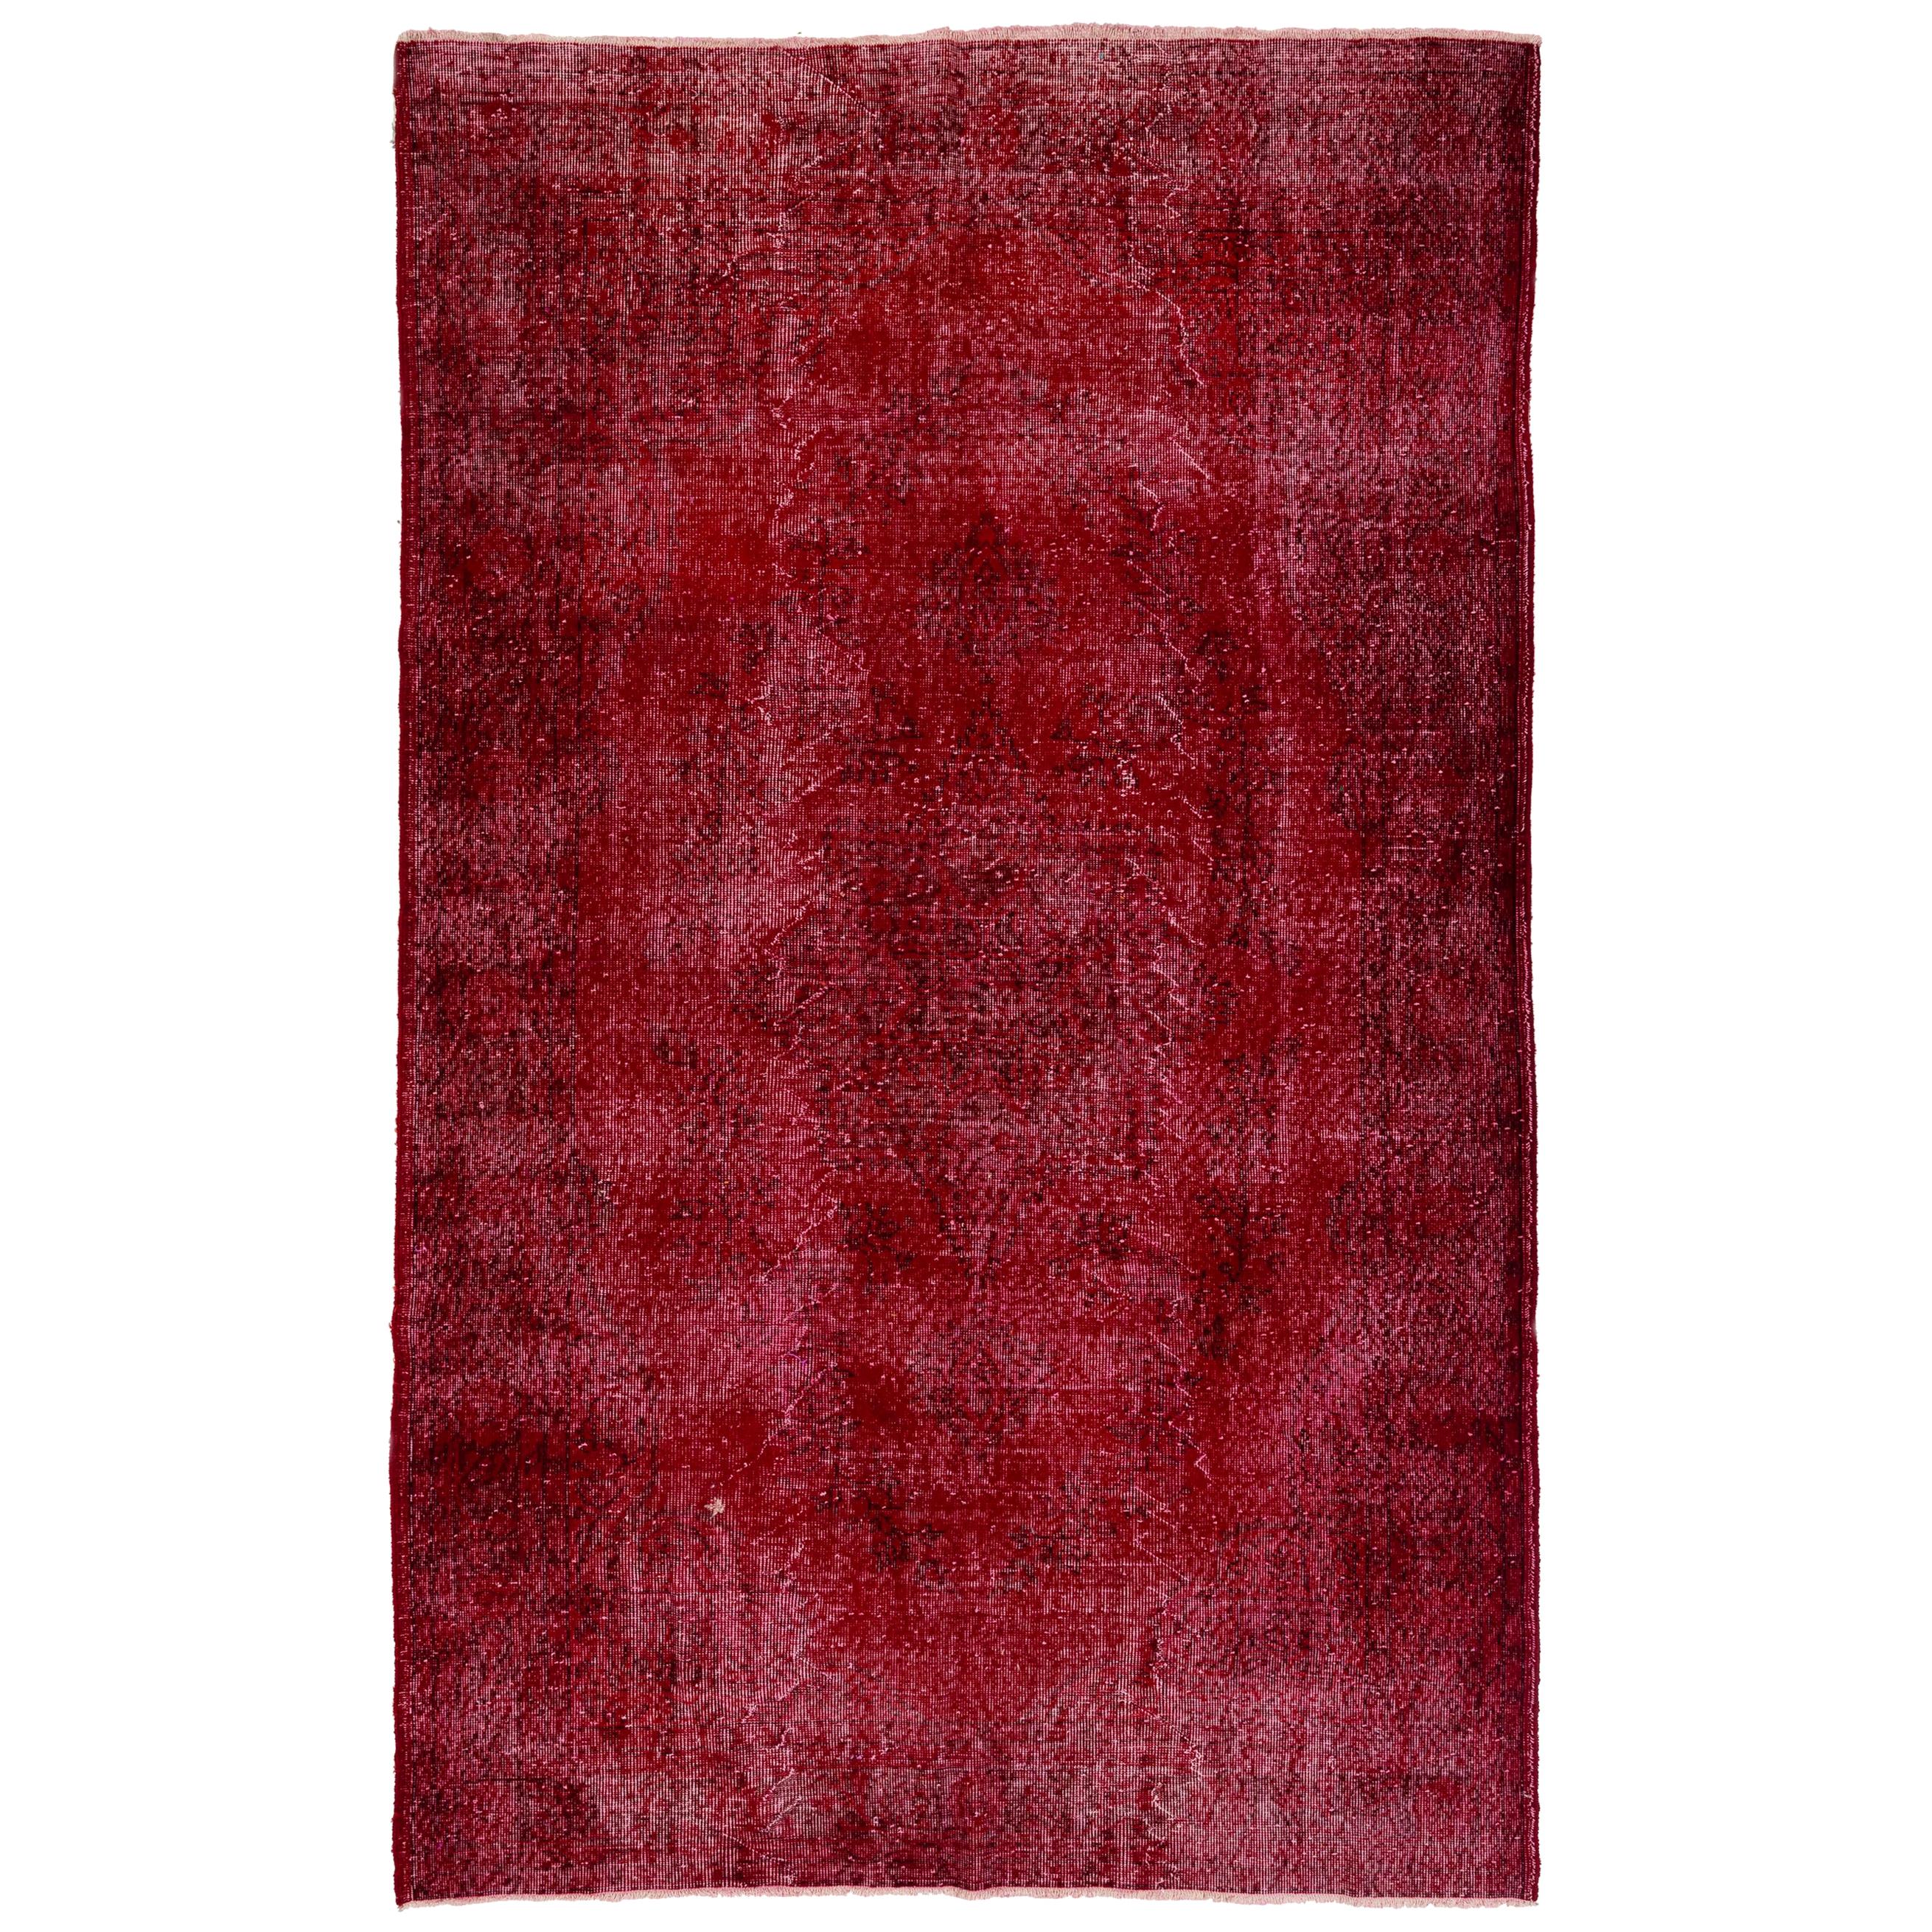 6.2x10 Ft Vintage Handmade Turkish Rug Re-Dyed in Red Color for Modern Interiors For Sale